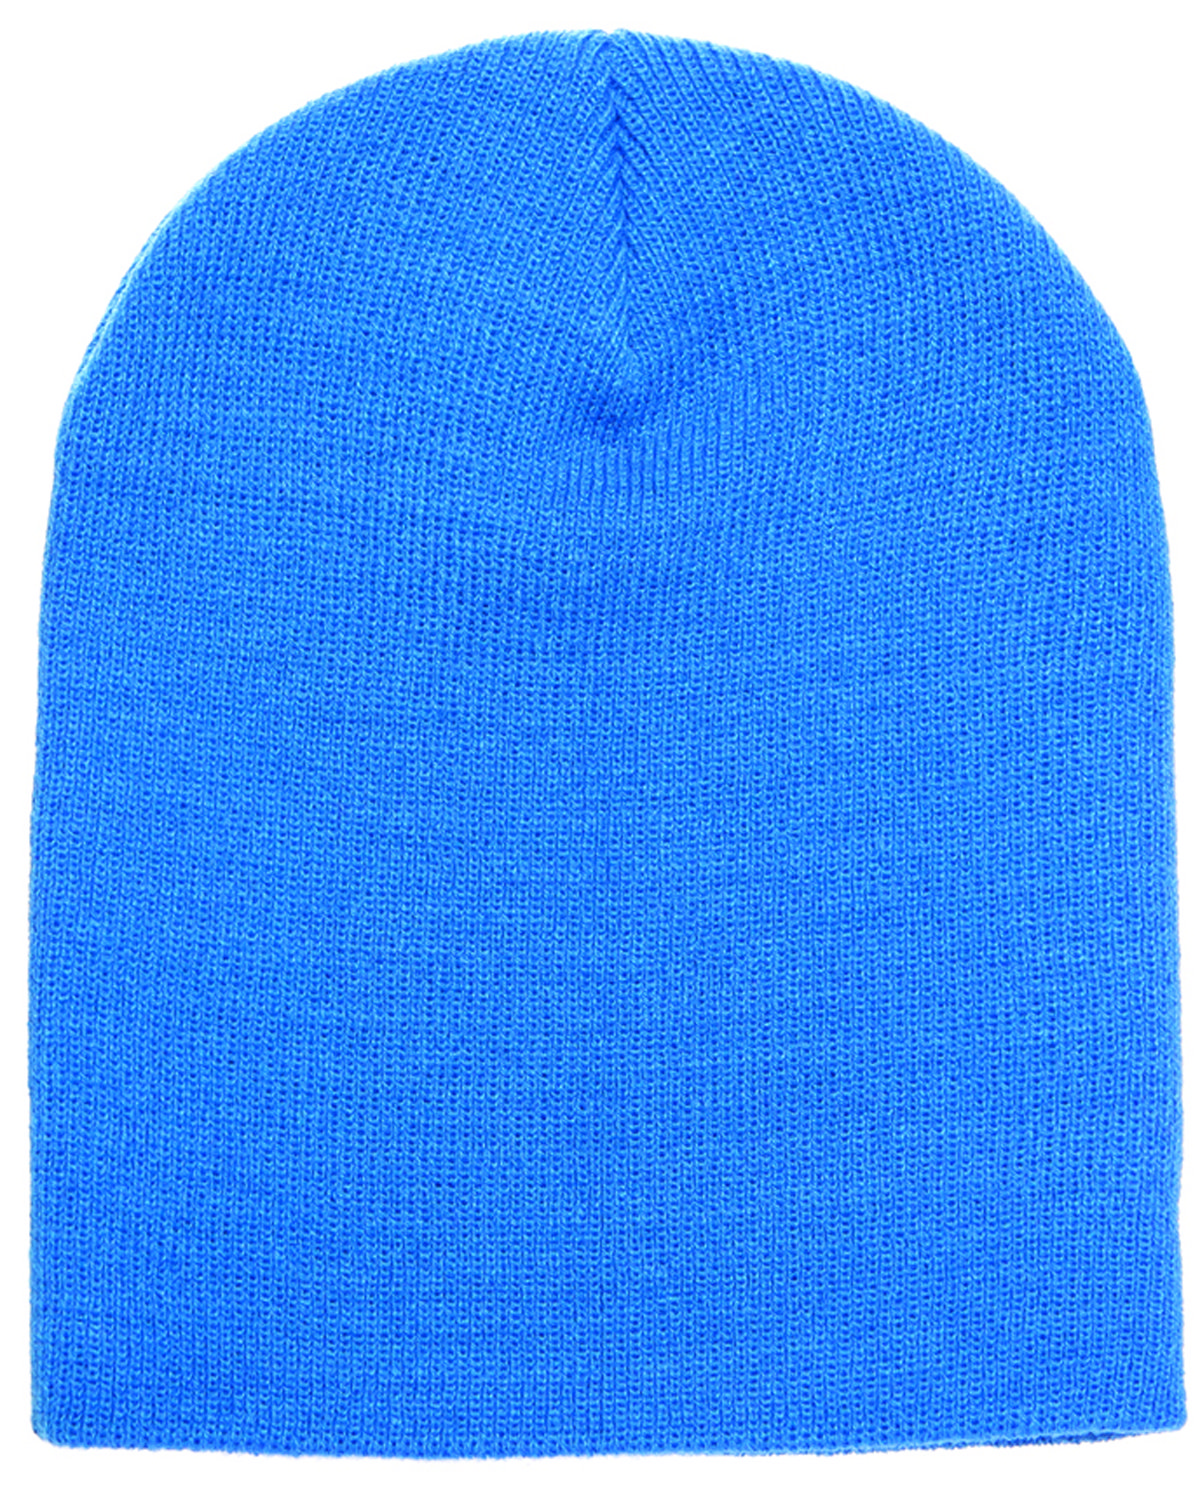 Beanie Knit Adult Yupoong alphabroder |